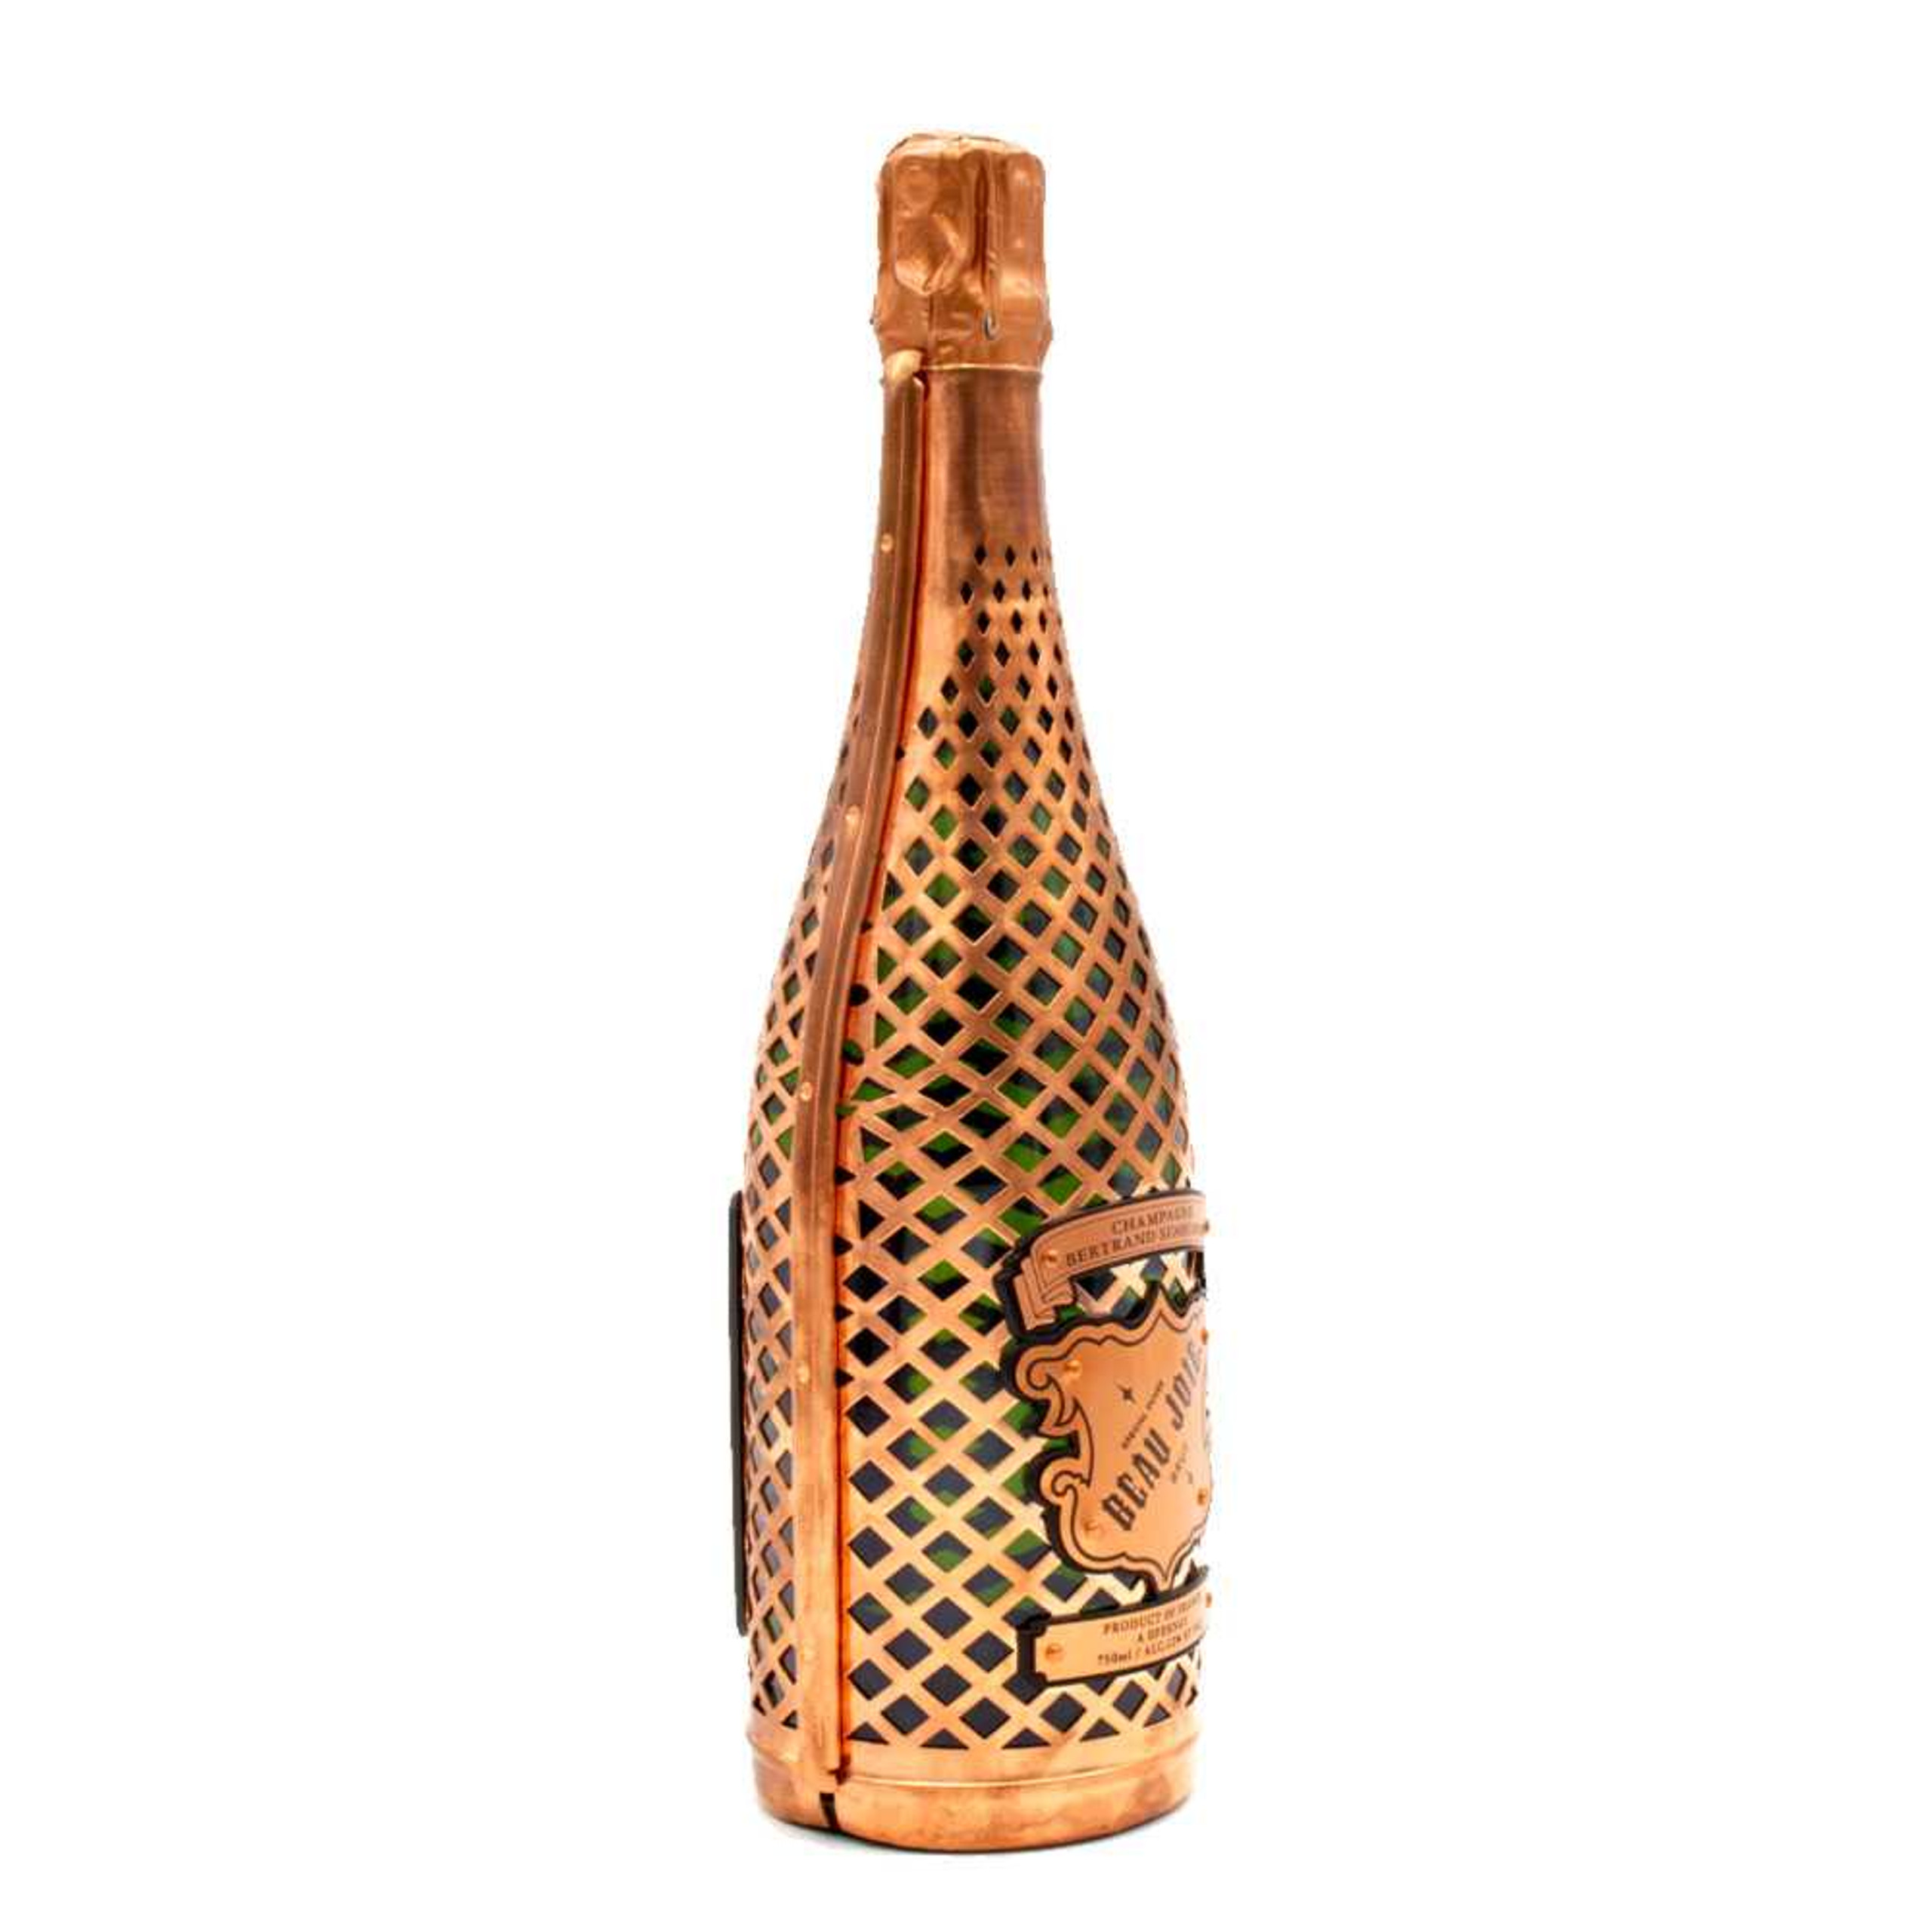 Champagne Nicolas de Montbart Brut 750ml in Age-Restricted - Frabco.com